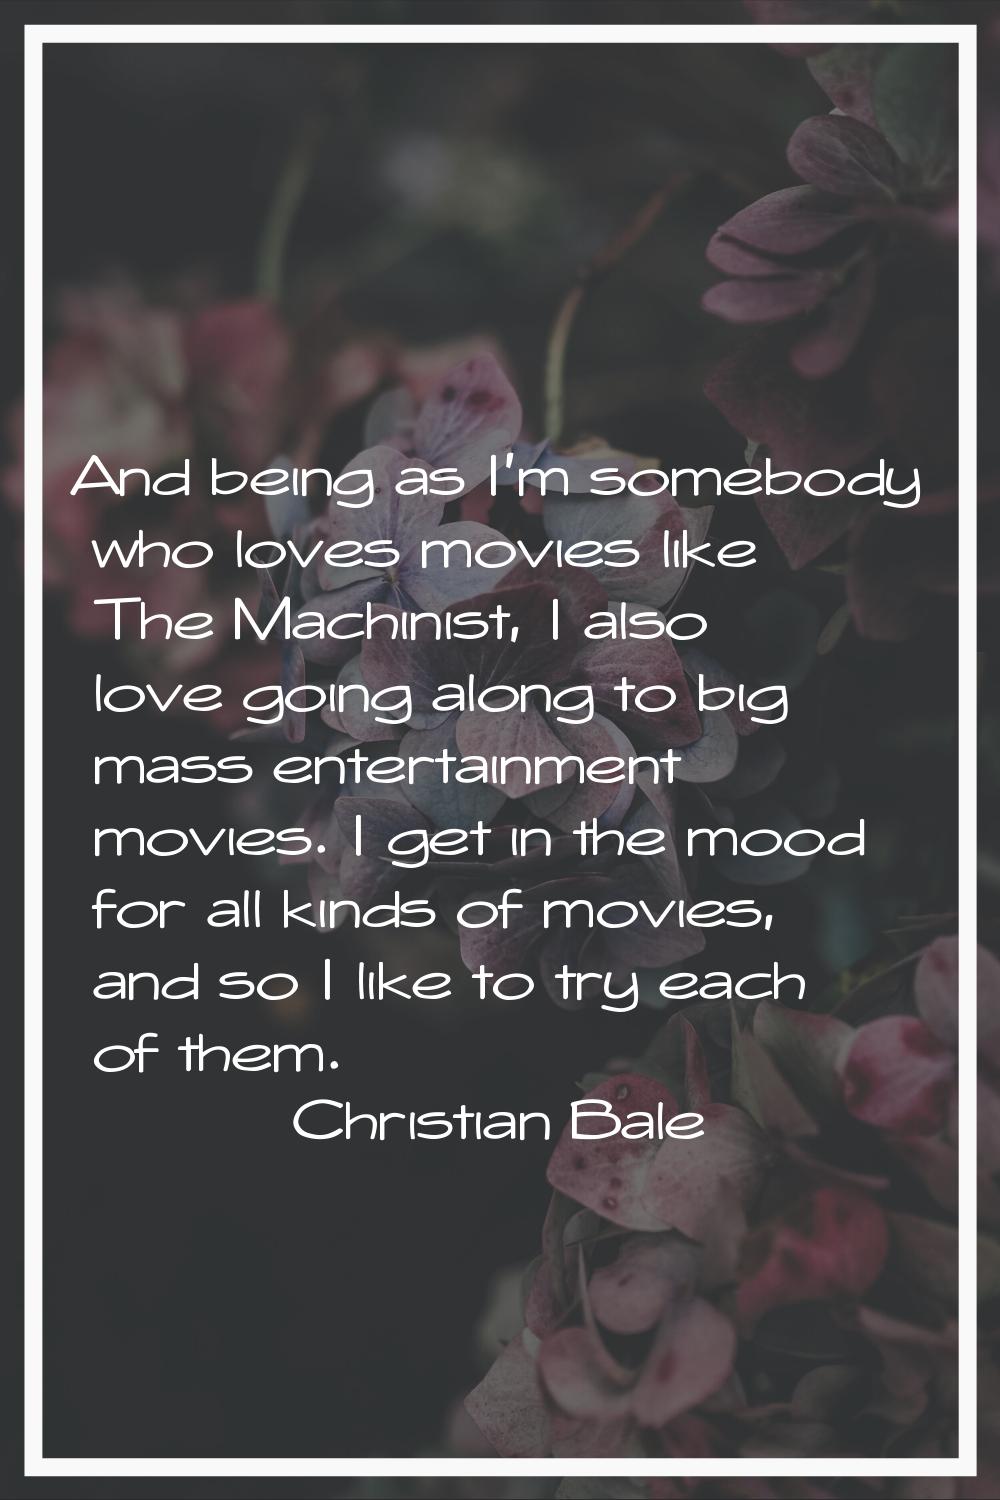 And being as I'm somebody who loves movies like The Machinist, I also love going along to big mass 